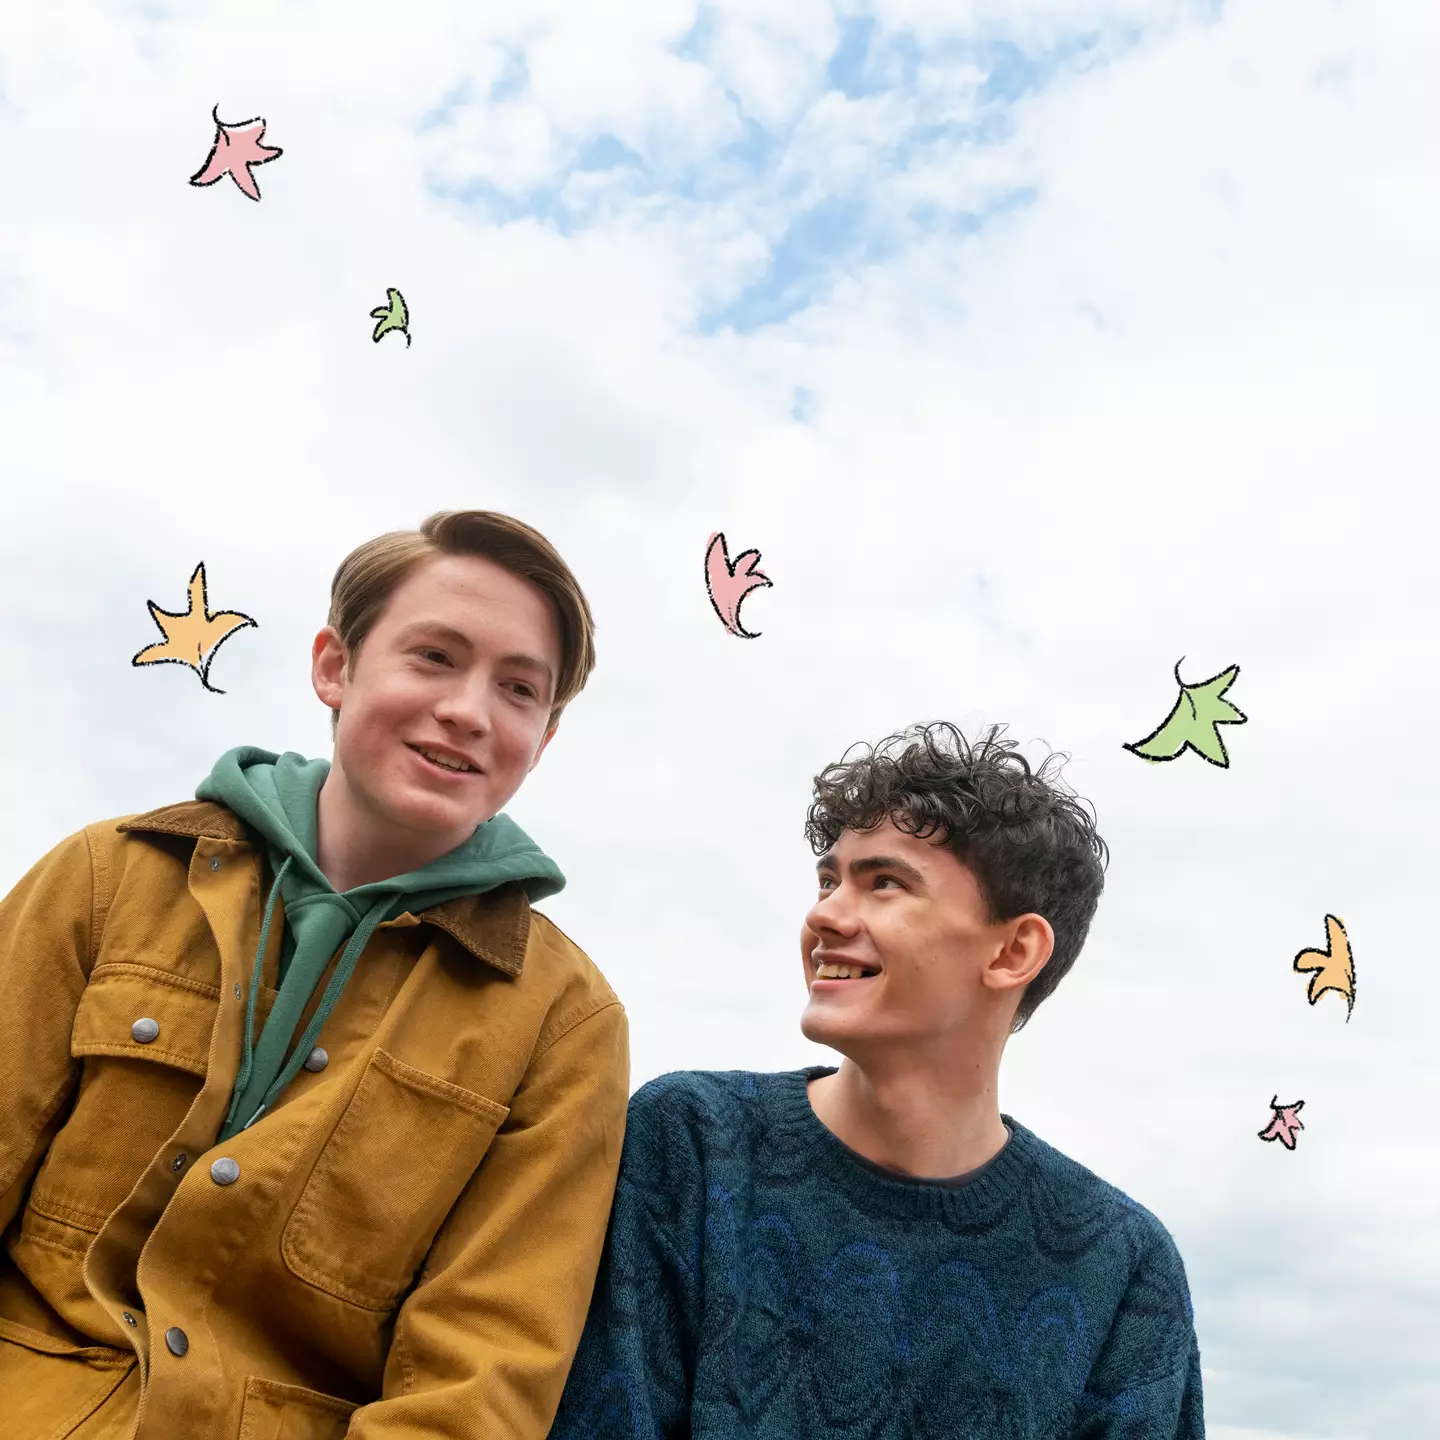 The Netflix drama series sees teenagers Charlie and Nick meeting at secondary school, with their friendship soon turning into an ‘unexpected romance’ (Netflix).